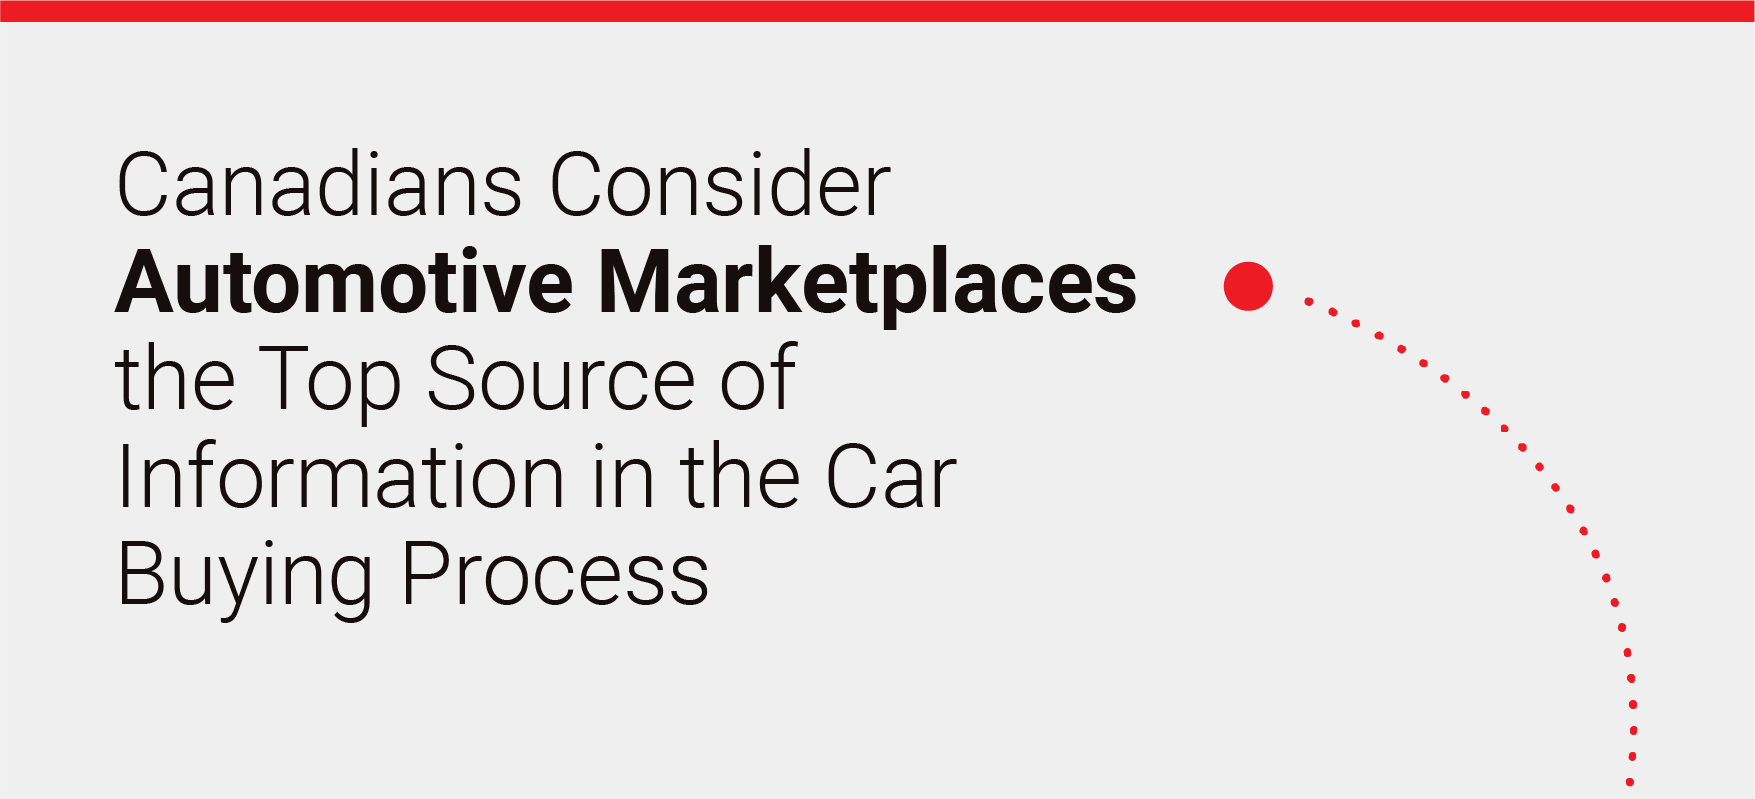 Automotive Marketplaces Rank Top Source for Canadian Car Buyers